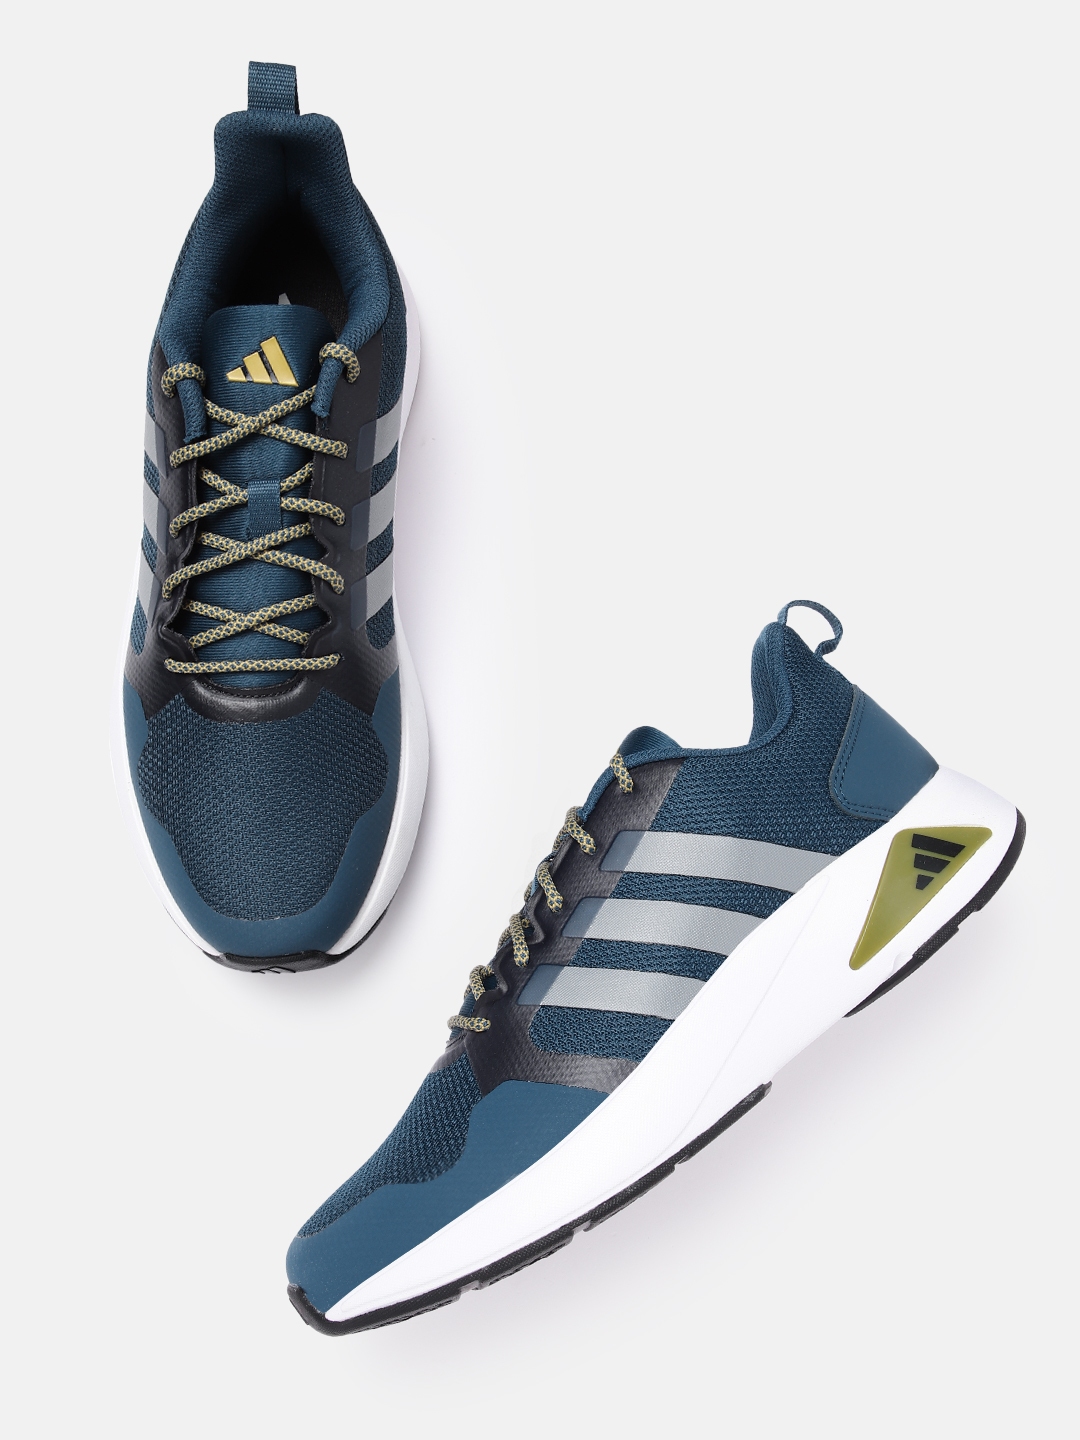 Buy ADIDAS Men Woven Design Laufen Speed Running Shoes - Sports Shoes ...